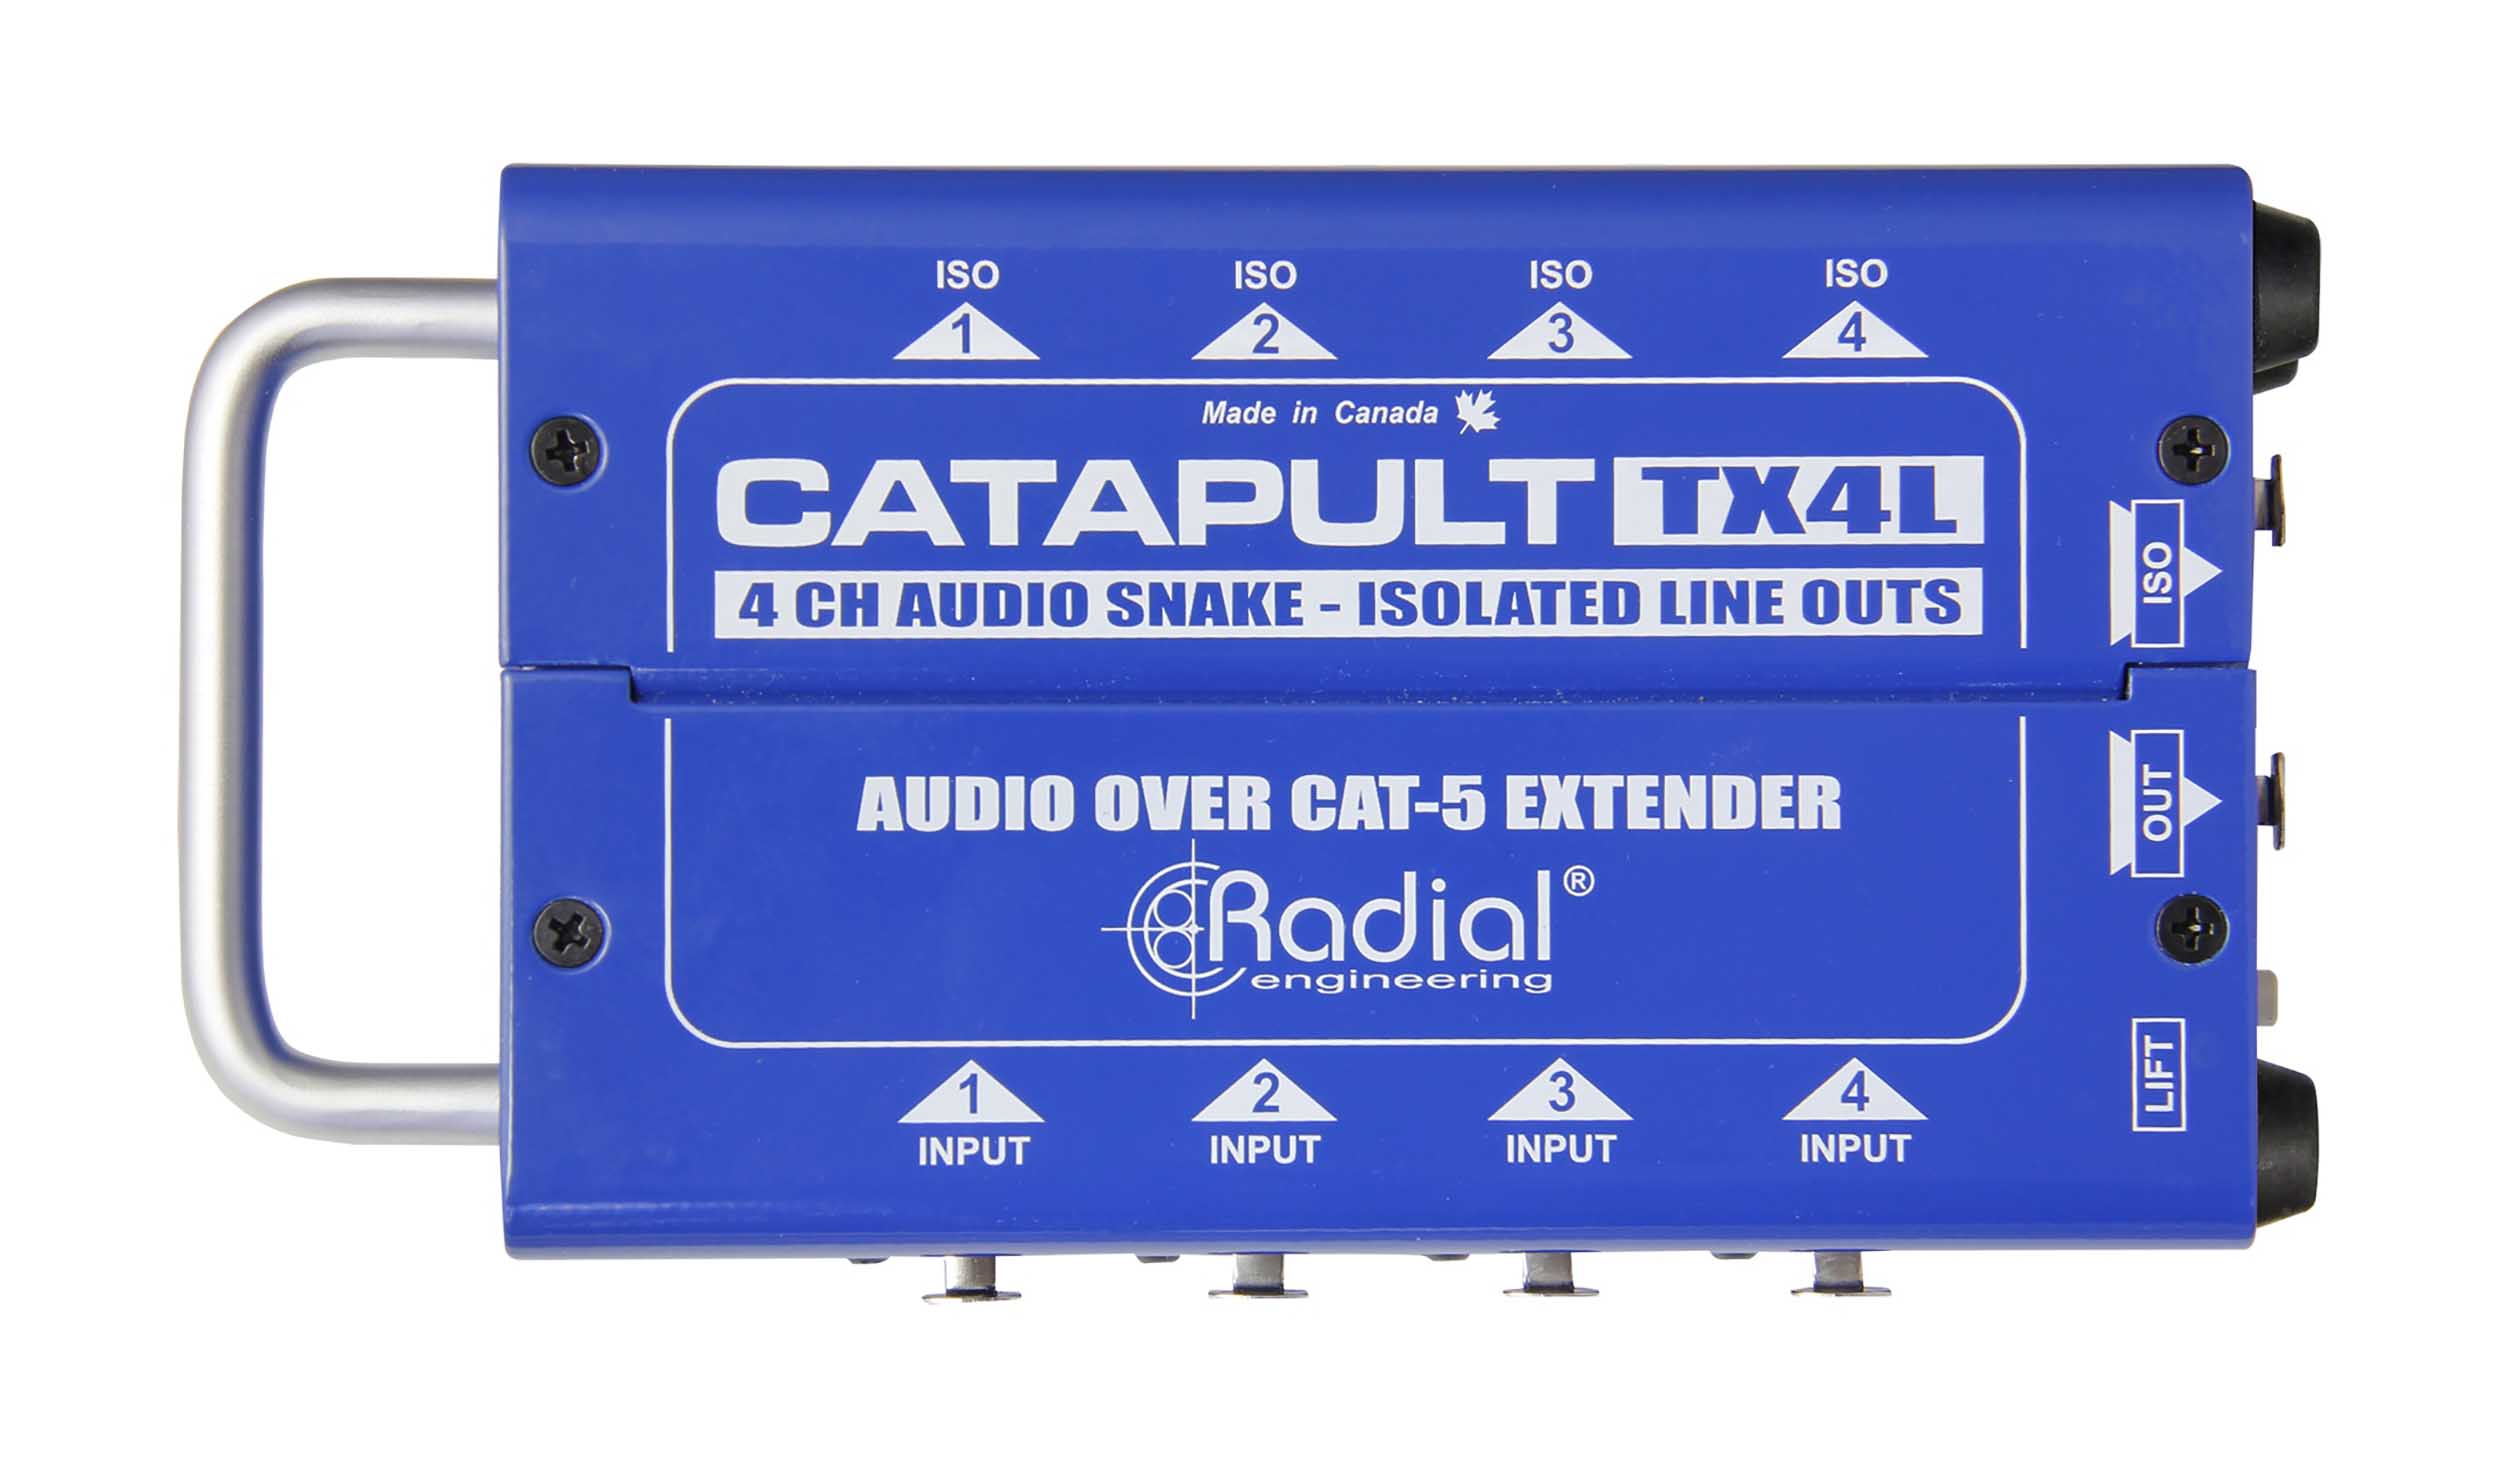 Radial Engineering Catapult 4-Channel Cat 5 Audio Snake- Transmitter by Radial Engineering